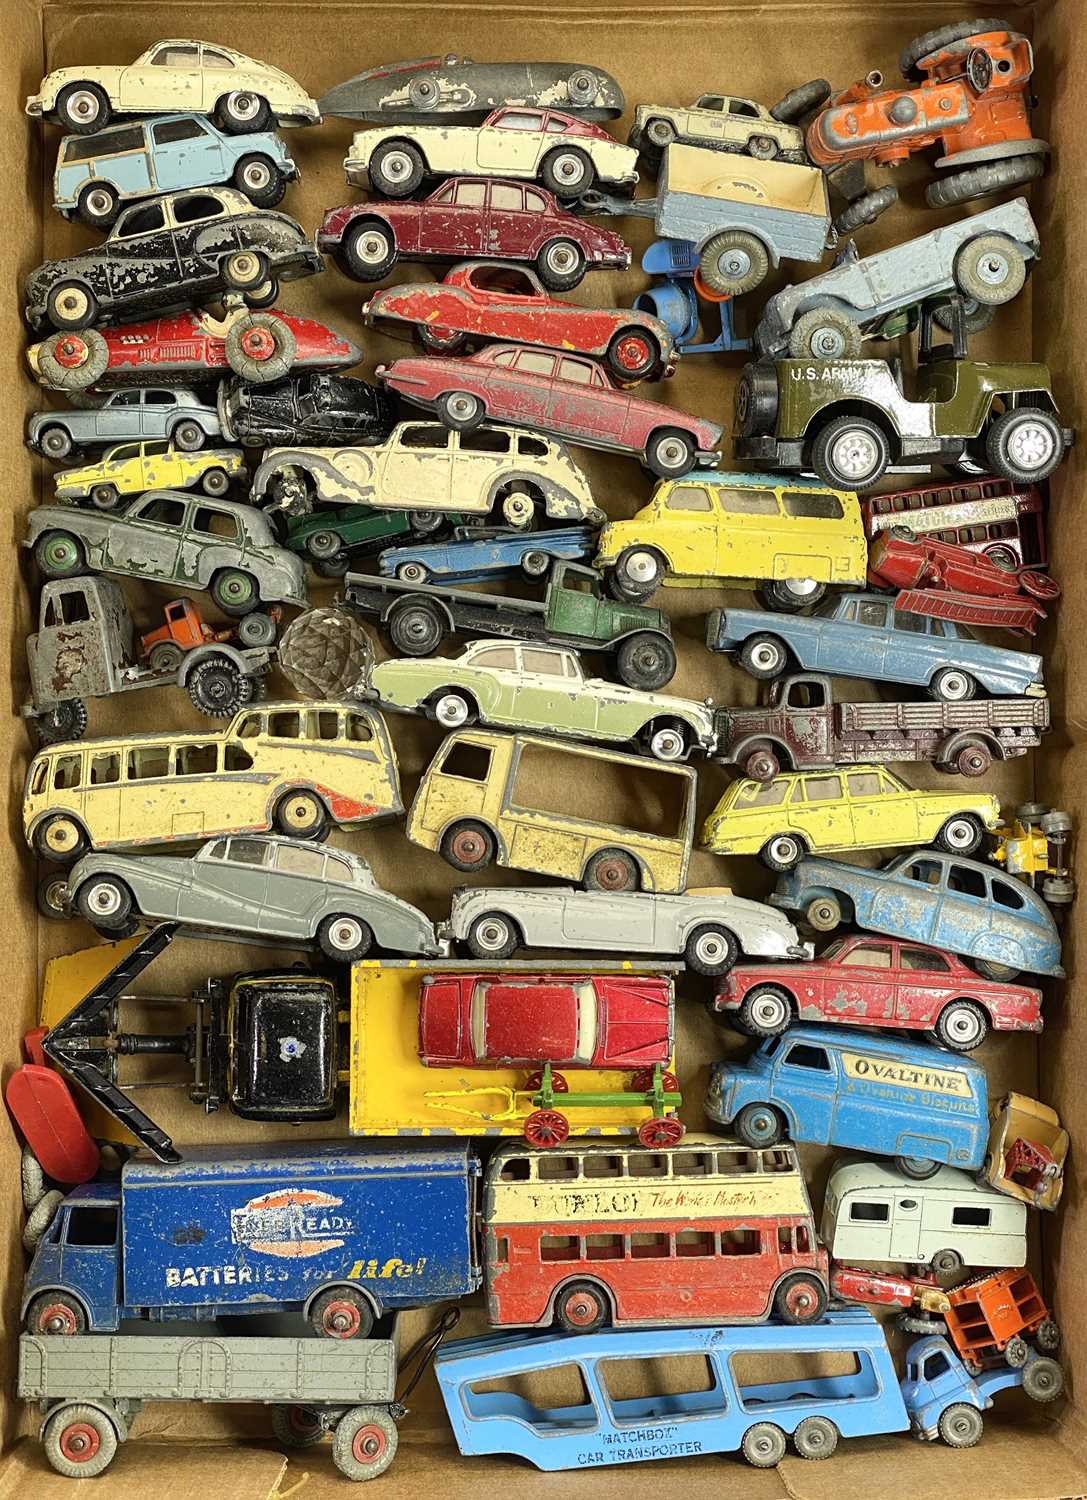 VINTAGE UNBOXED DIECAST VEHICLES - makers include Dinky, Corgi, Matchbox, Lesney, some good early